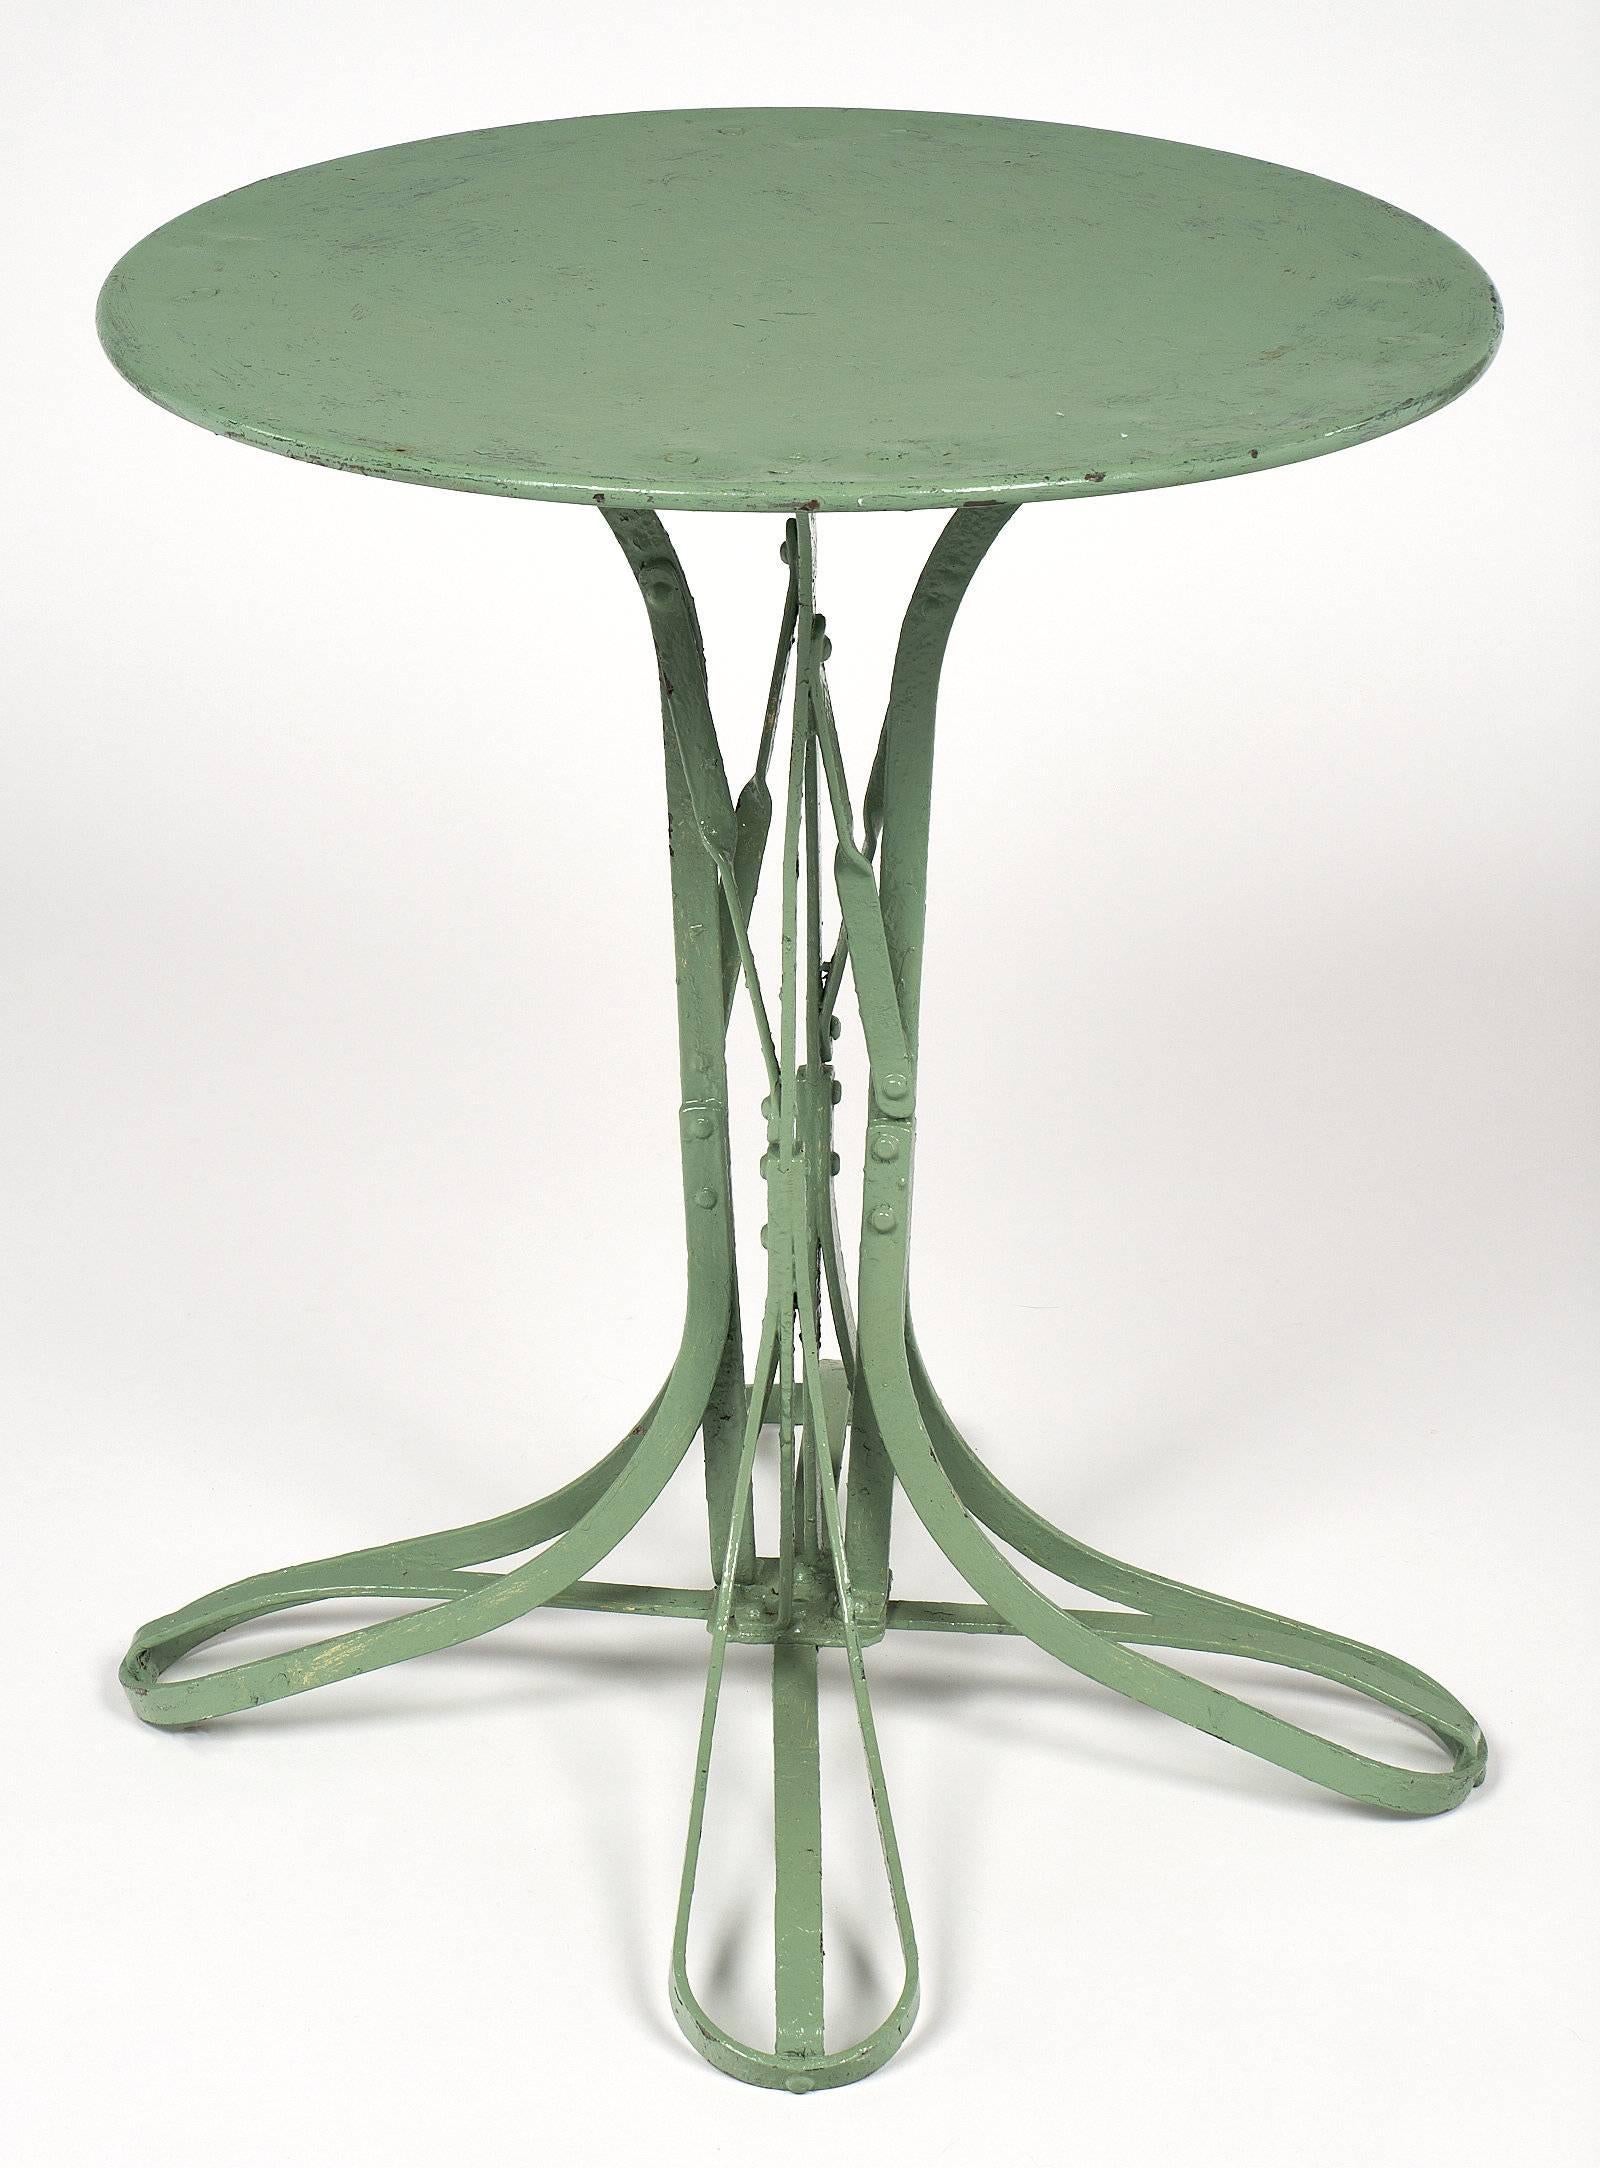 Charming bistro table from France made of iron. The legs are curved around for an organic element, and the piece is painted the original green color. The patina is original as well, and adds a depth a character to the piece.